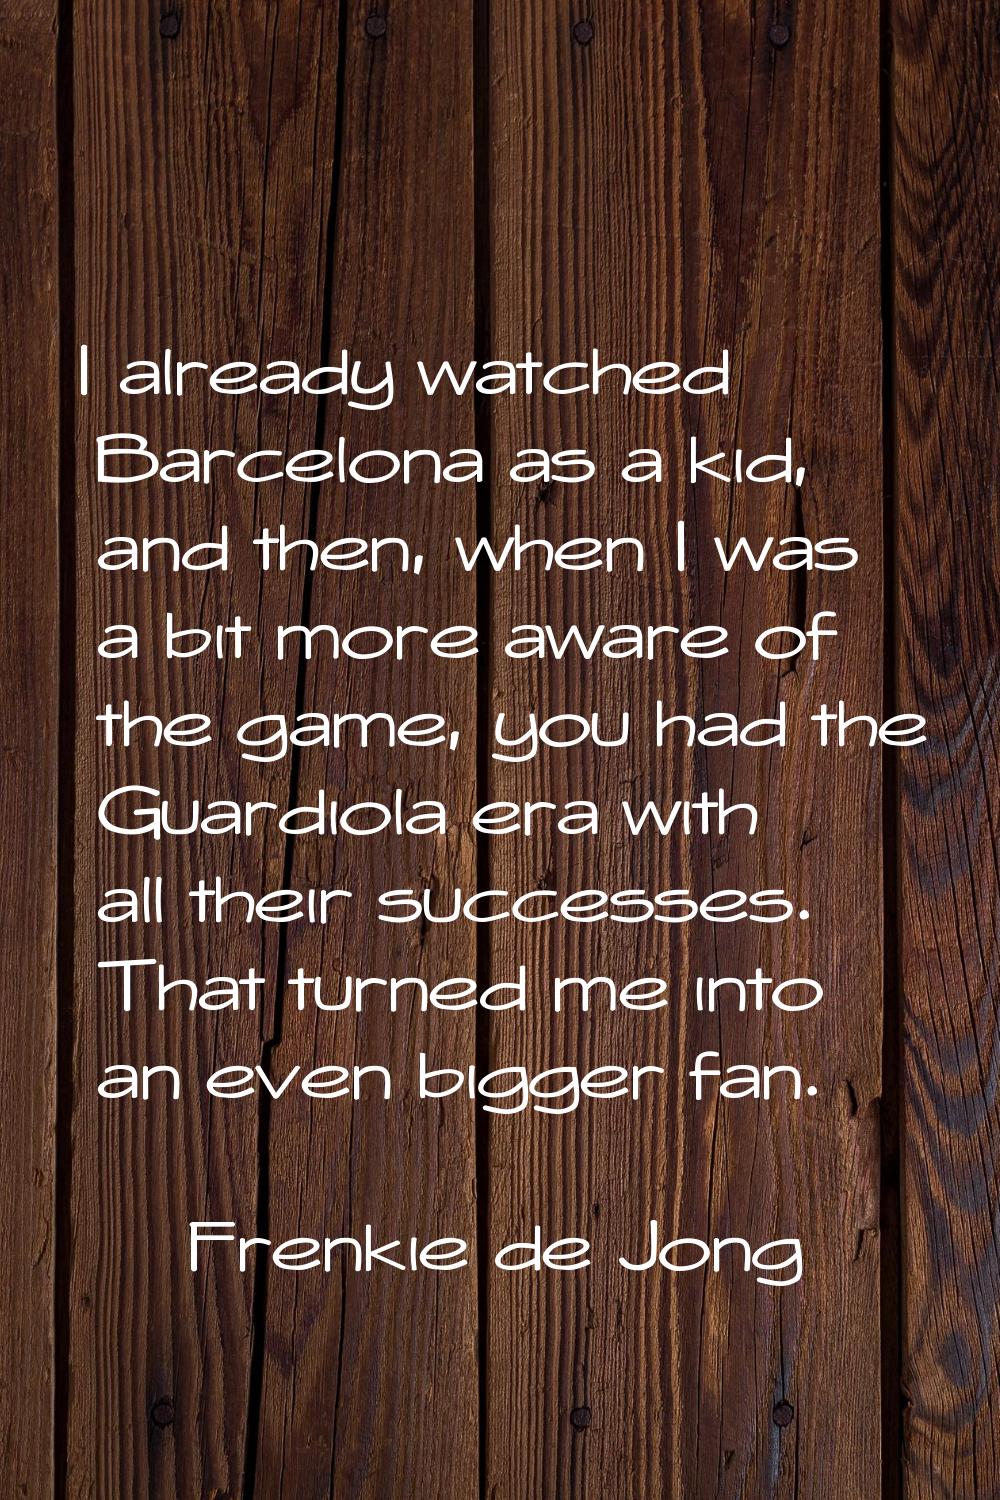 I already watched Barcelona as a kid, and then, when I was a bit more aware of the game, you had th